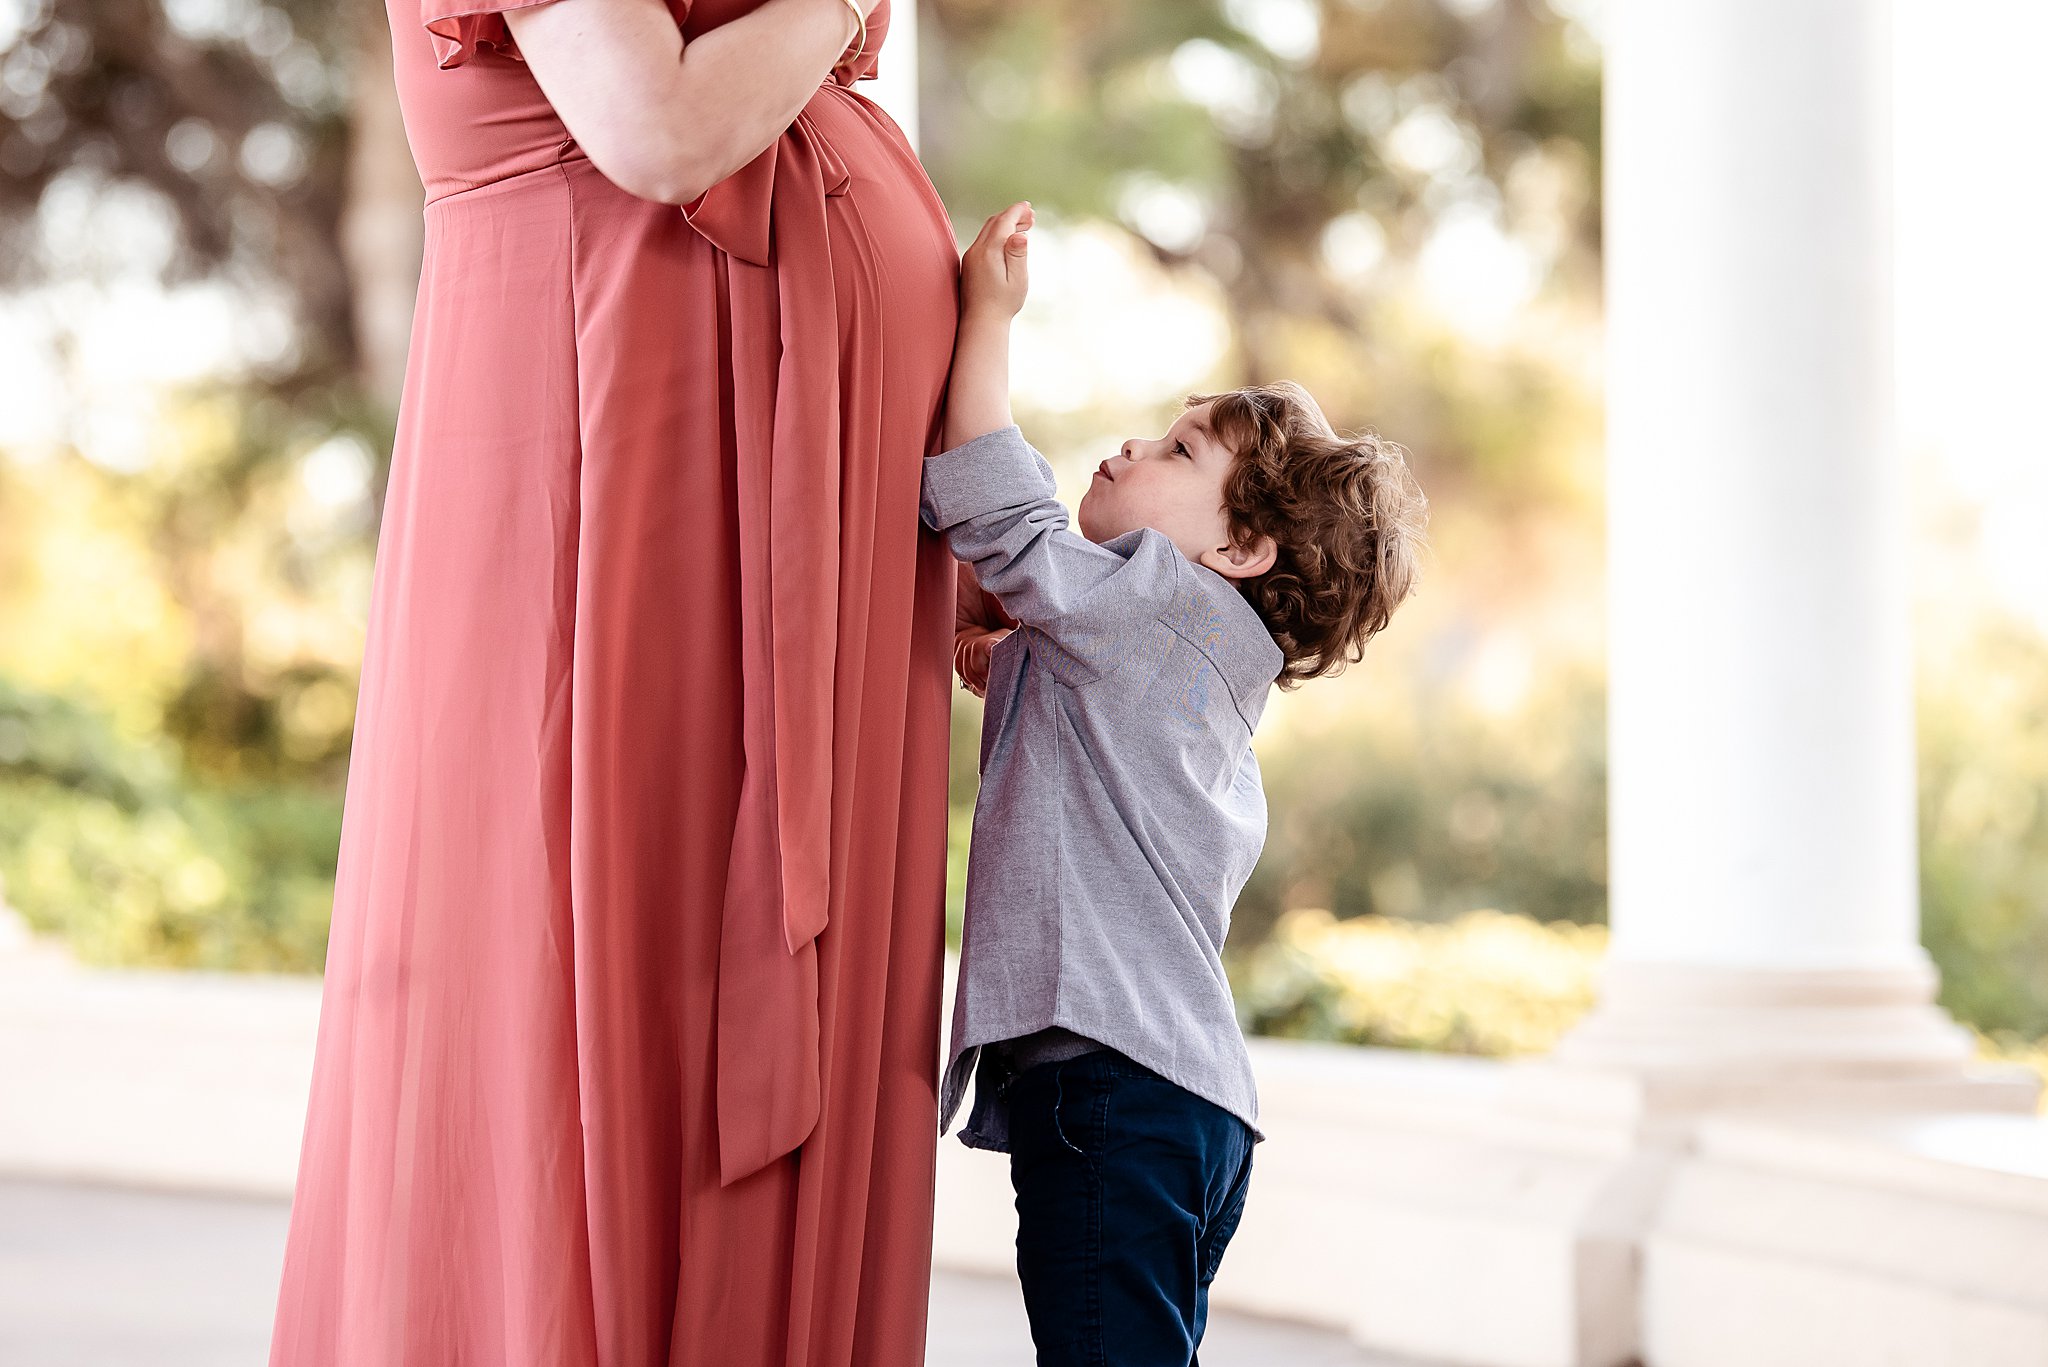 A young boy reaches up to his mom's pregnant belly in a park san diego baby shower venues